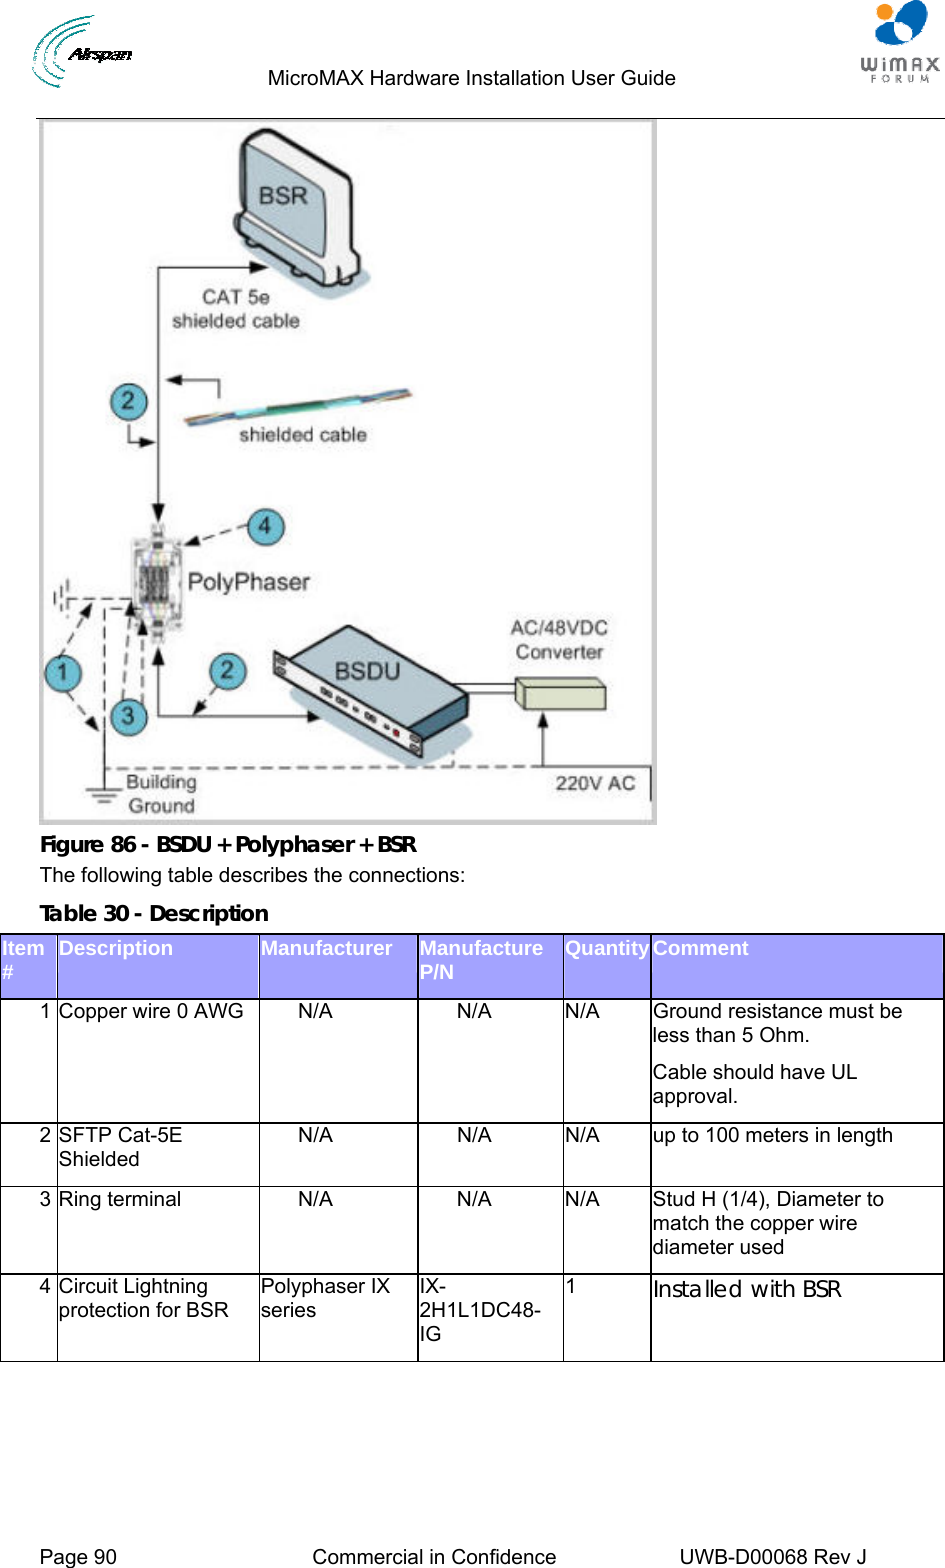                                  MicroMAX Hardware Installation User Guide     Page 90  Commercial in Confidence  UWB-D00068 Rev J    Figure 86 - BSDU + Polyphaser + BSR The following table describes the connections: Table 30 - Description Item #  Description  Manufacturer  Manufacture P/N  QuantityComment 1 Copper wire 0 AWG  N/A  N/A  N/A  Ground resistance must be less than 5 Ohm. Cable should have UL approval. 2 SFTP Cat-5E Shielded N/A  N/A  N/A  up to 100 meters in length 3 Ring terminal  N/A  N/A  N/A  Stud H (1/4), Diameter to match the copper wire diameter used 4 Circuit Lightning protection for BSR Polyphaser IX series IX-2H1L1DC48-IG 1  Installed with BSR  